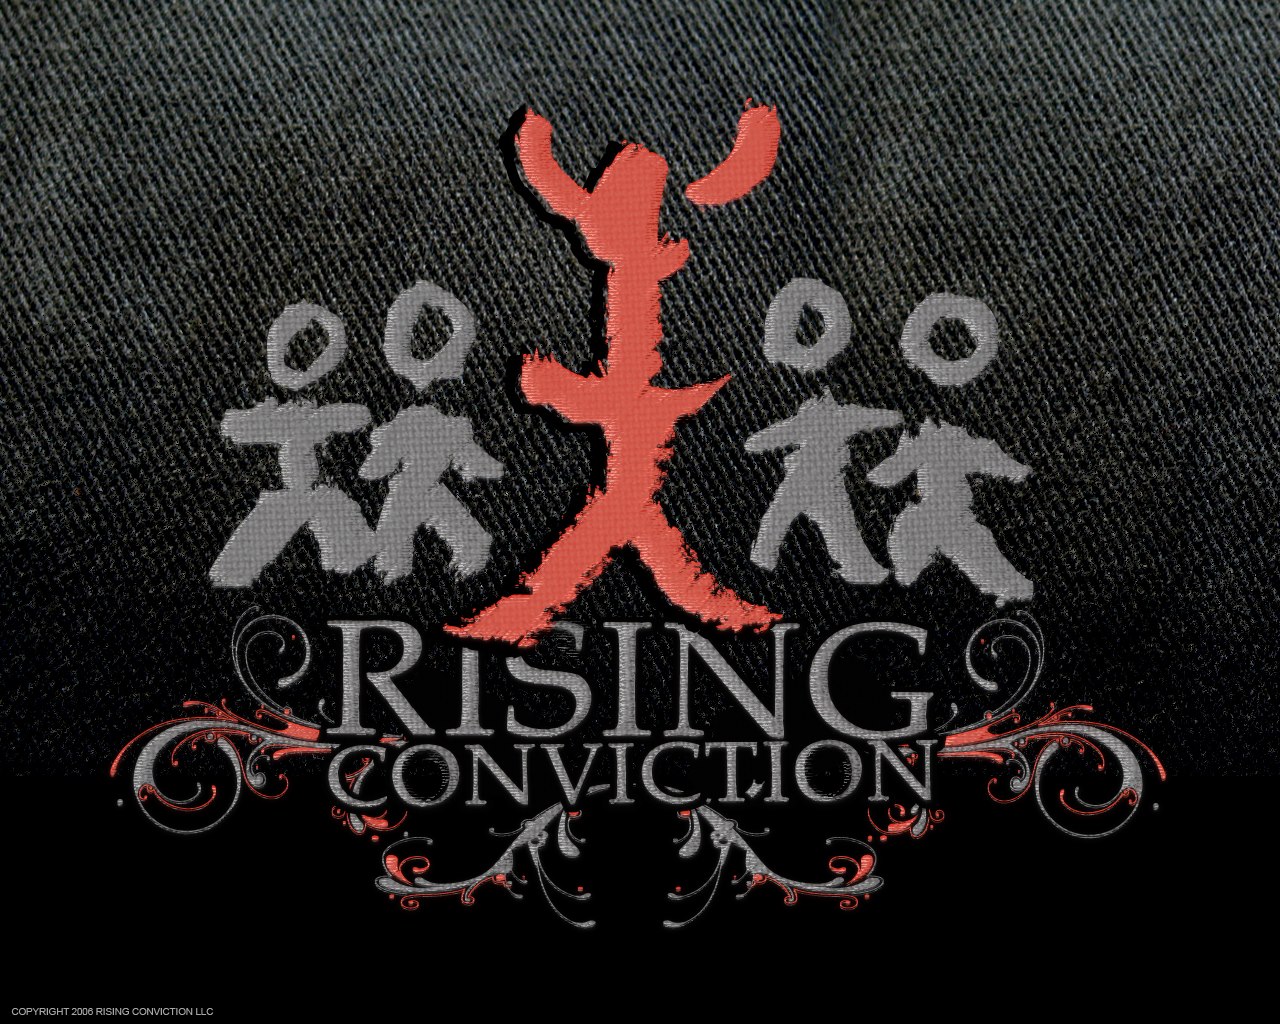 Make Your Next Event Rise with Rising Conviction